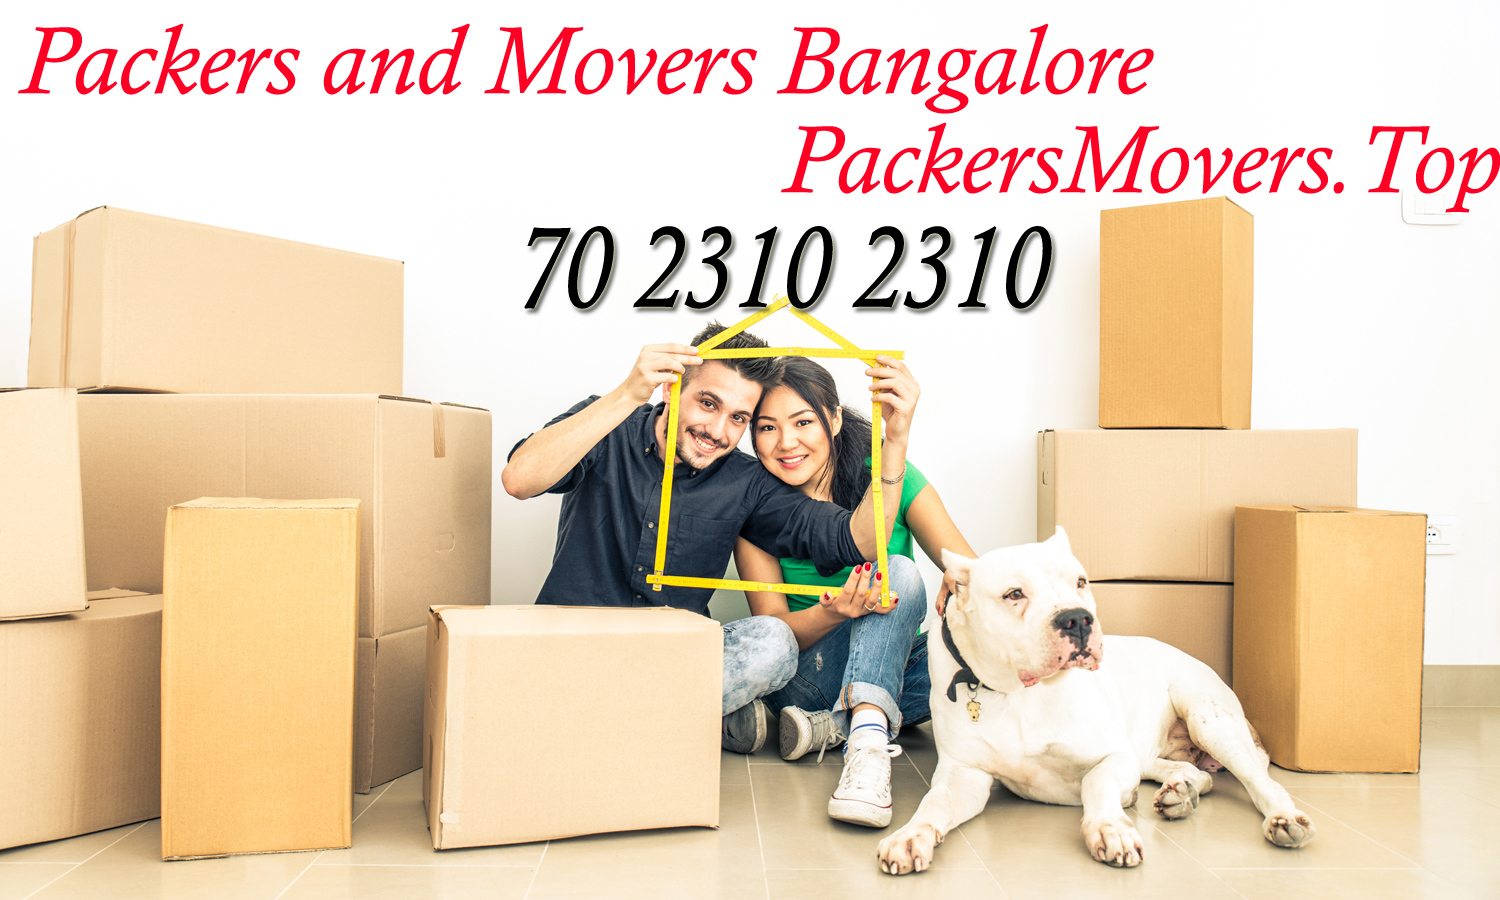 Top Packers and movers bangalore